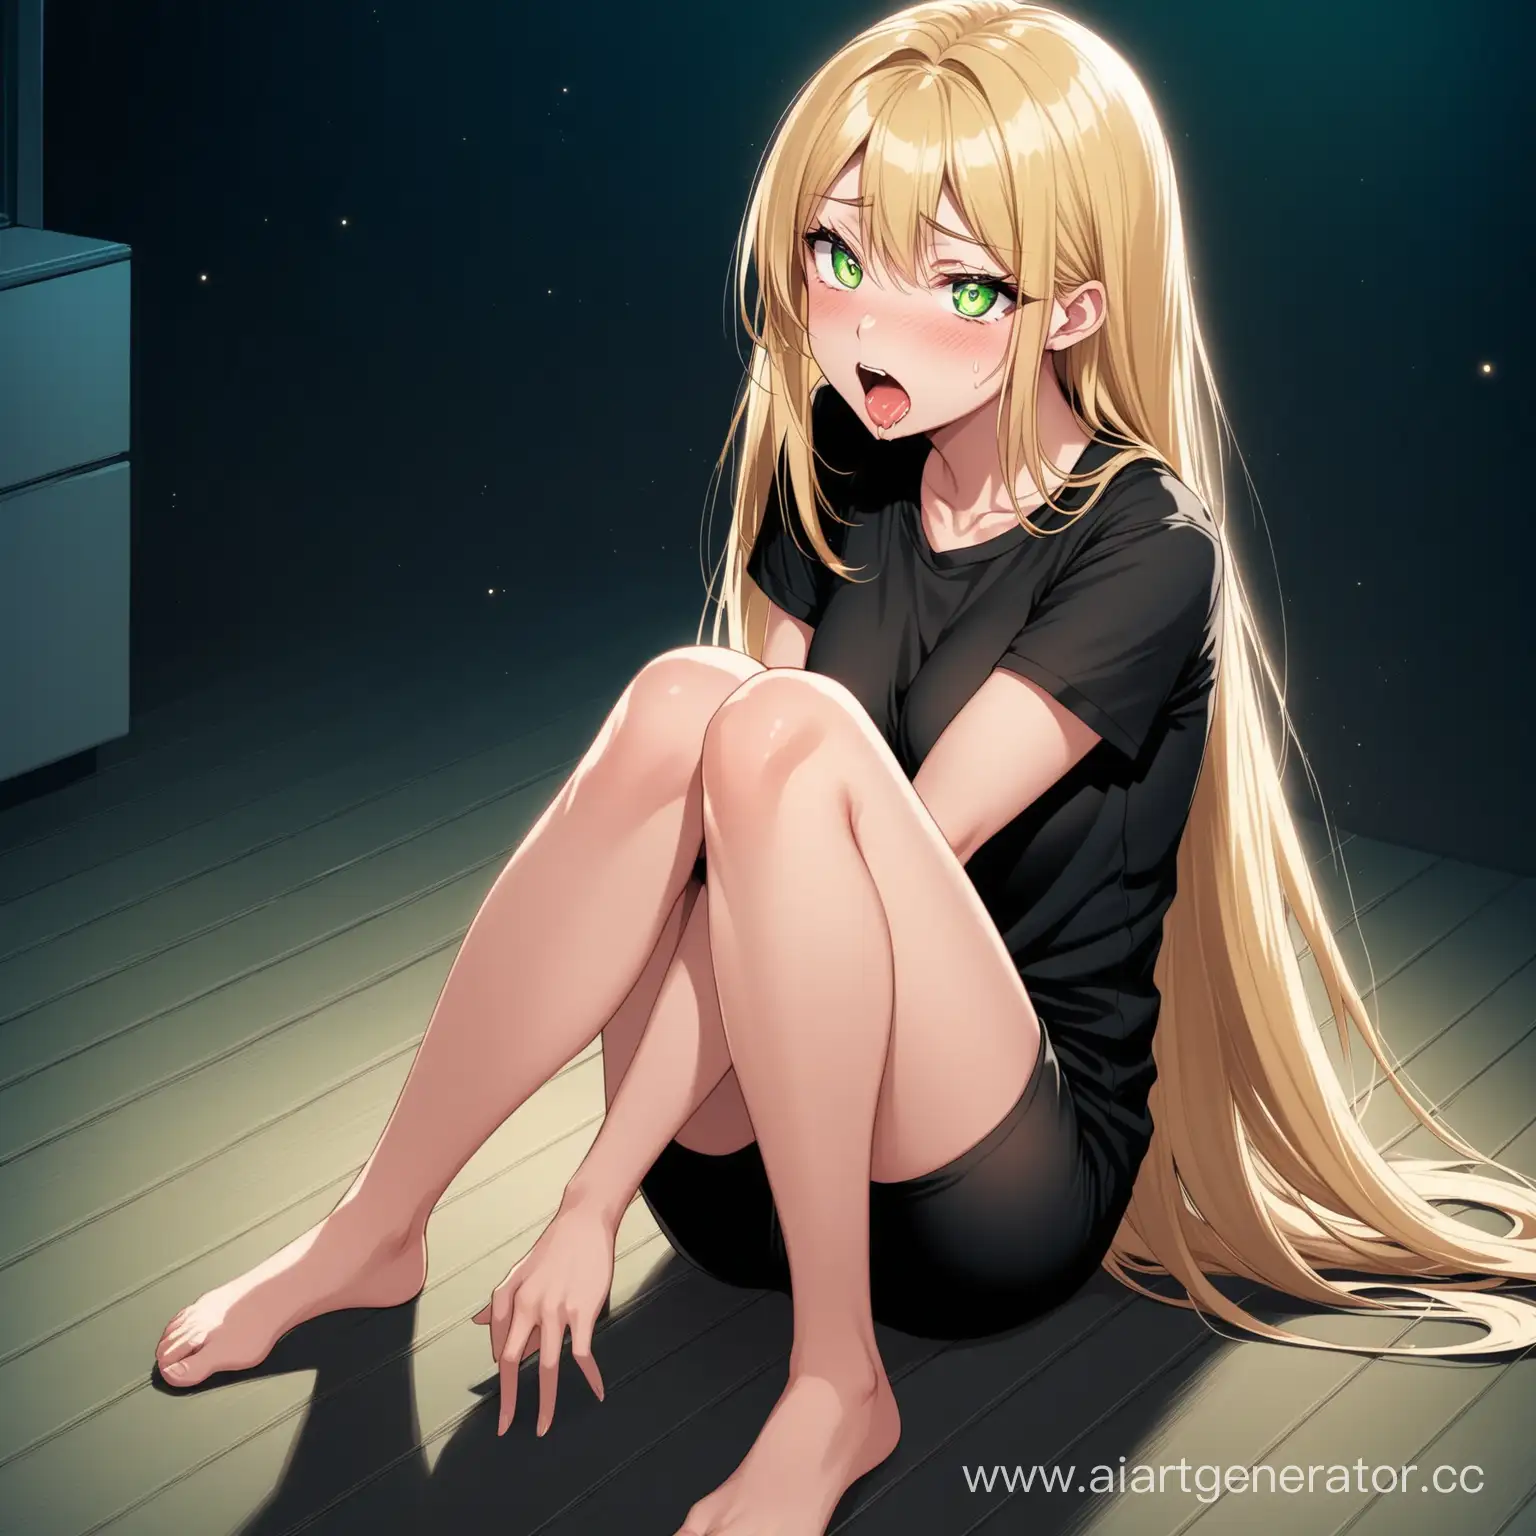 Blonde-Girl-with-Ahegao-Expression-in-Nighttime-Setting